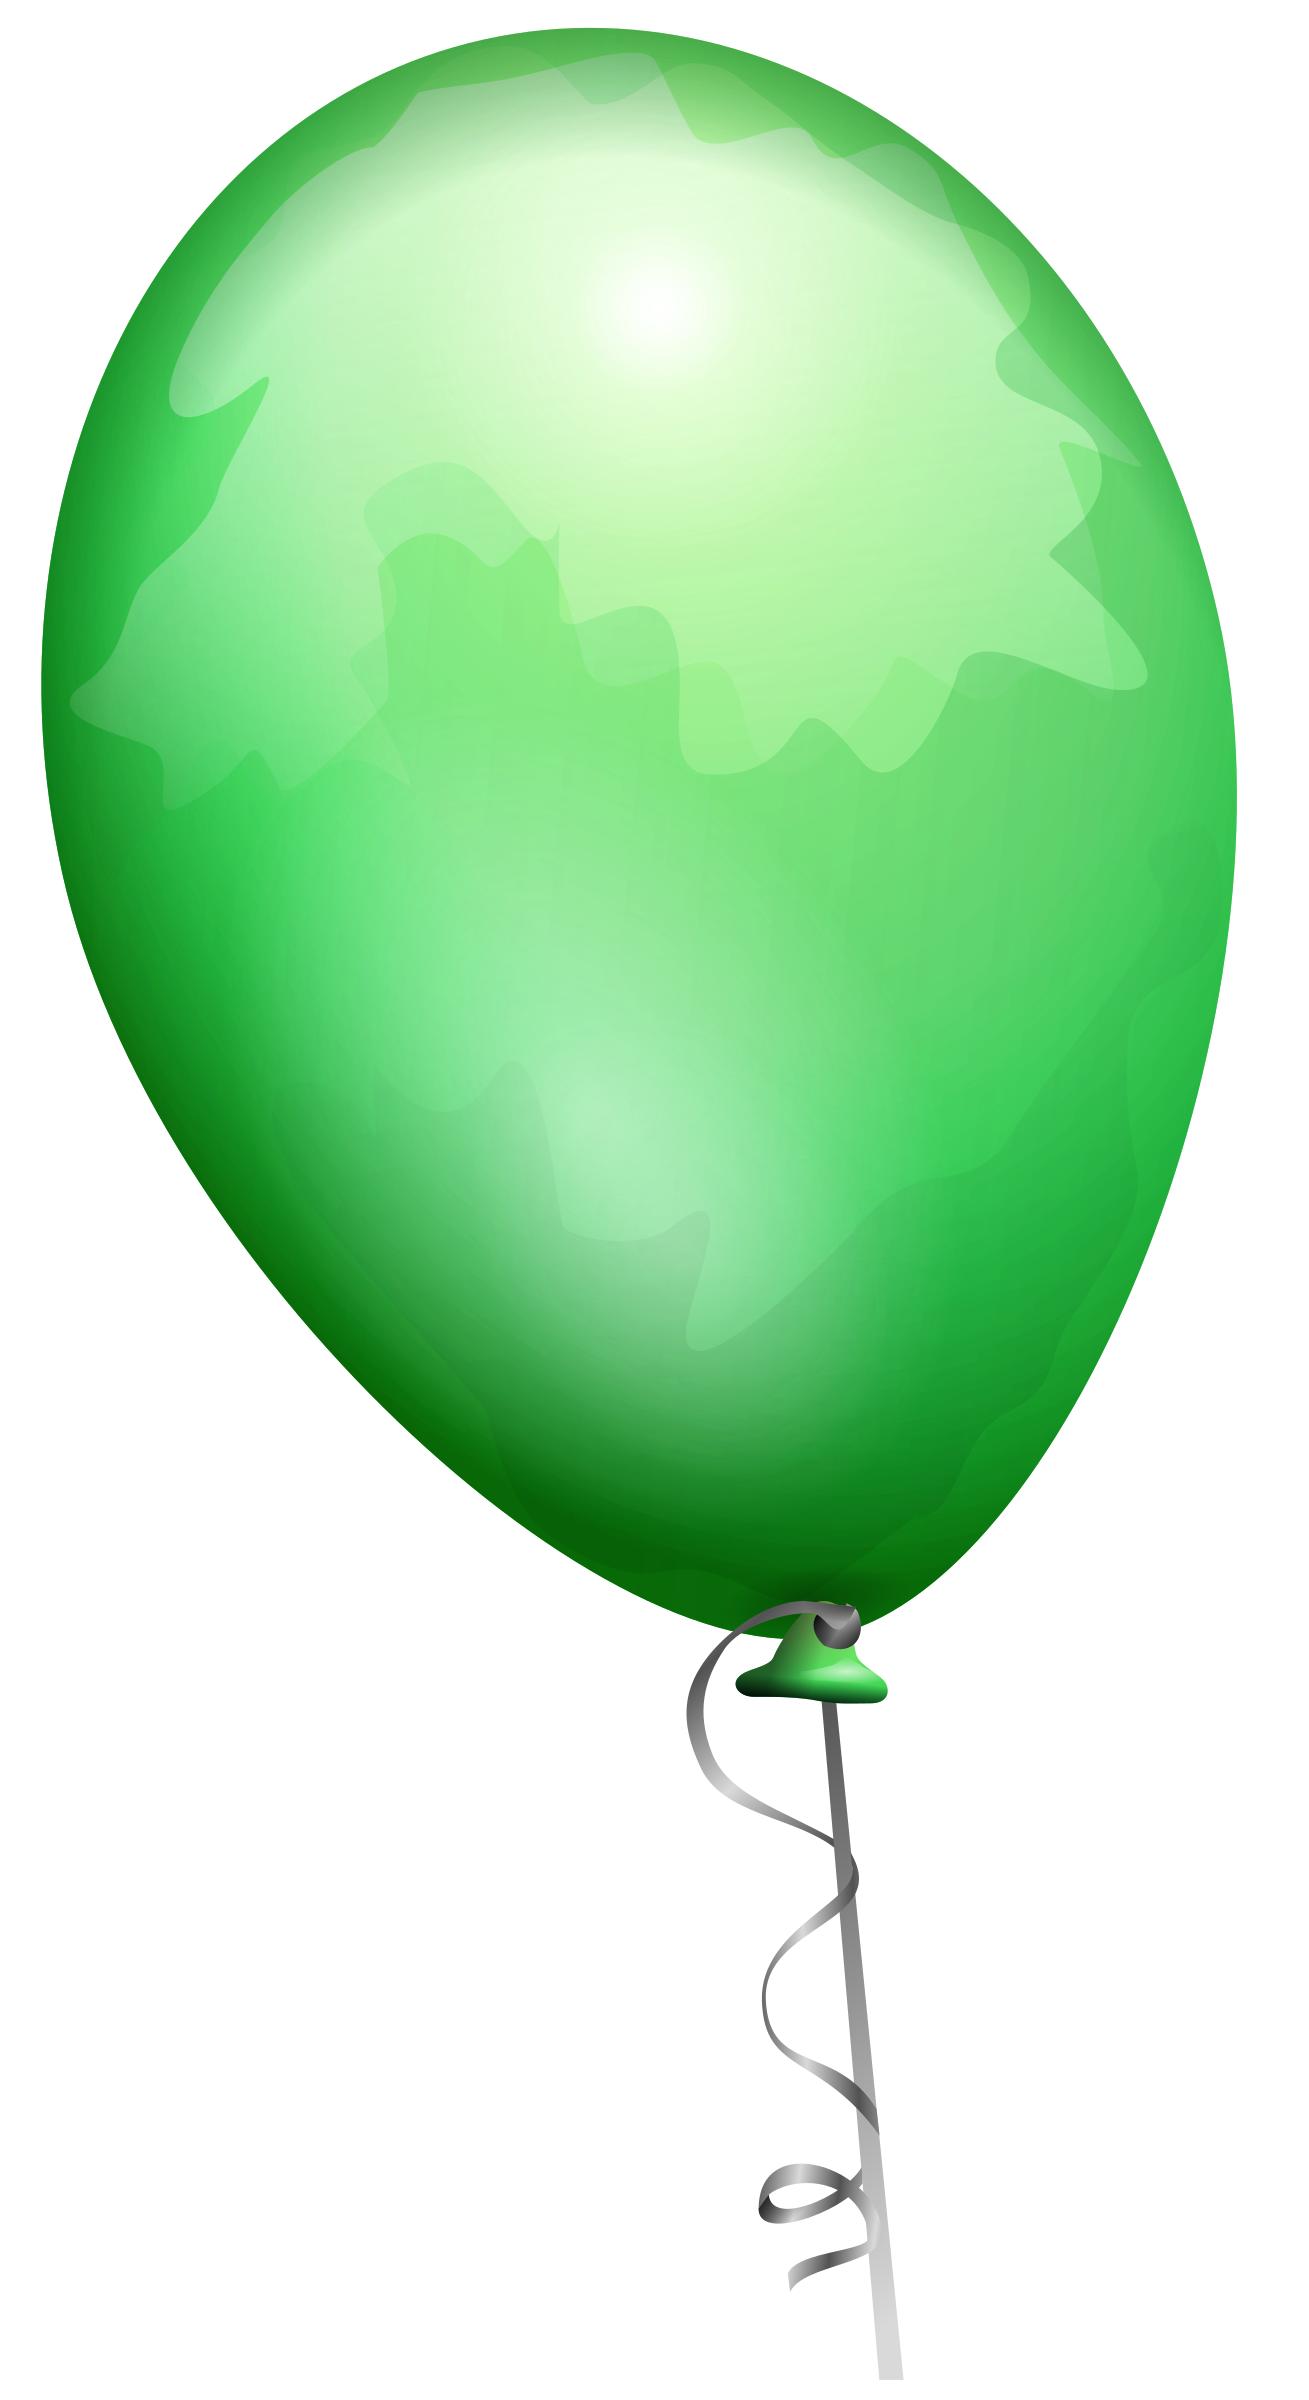 filter Diploma Lijm Green balloon Icons PNG - Free PNG and Icons Downloads